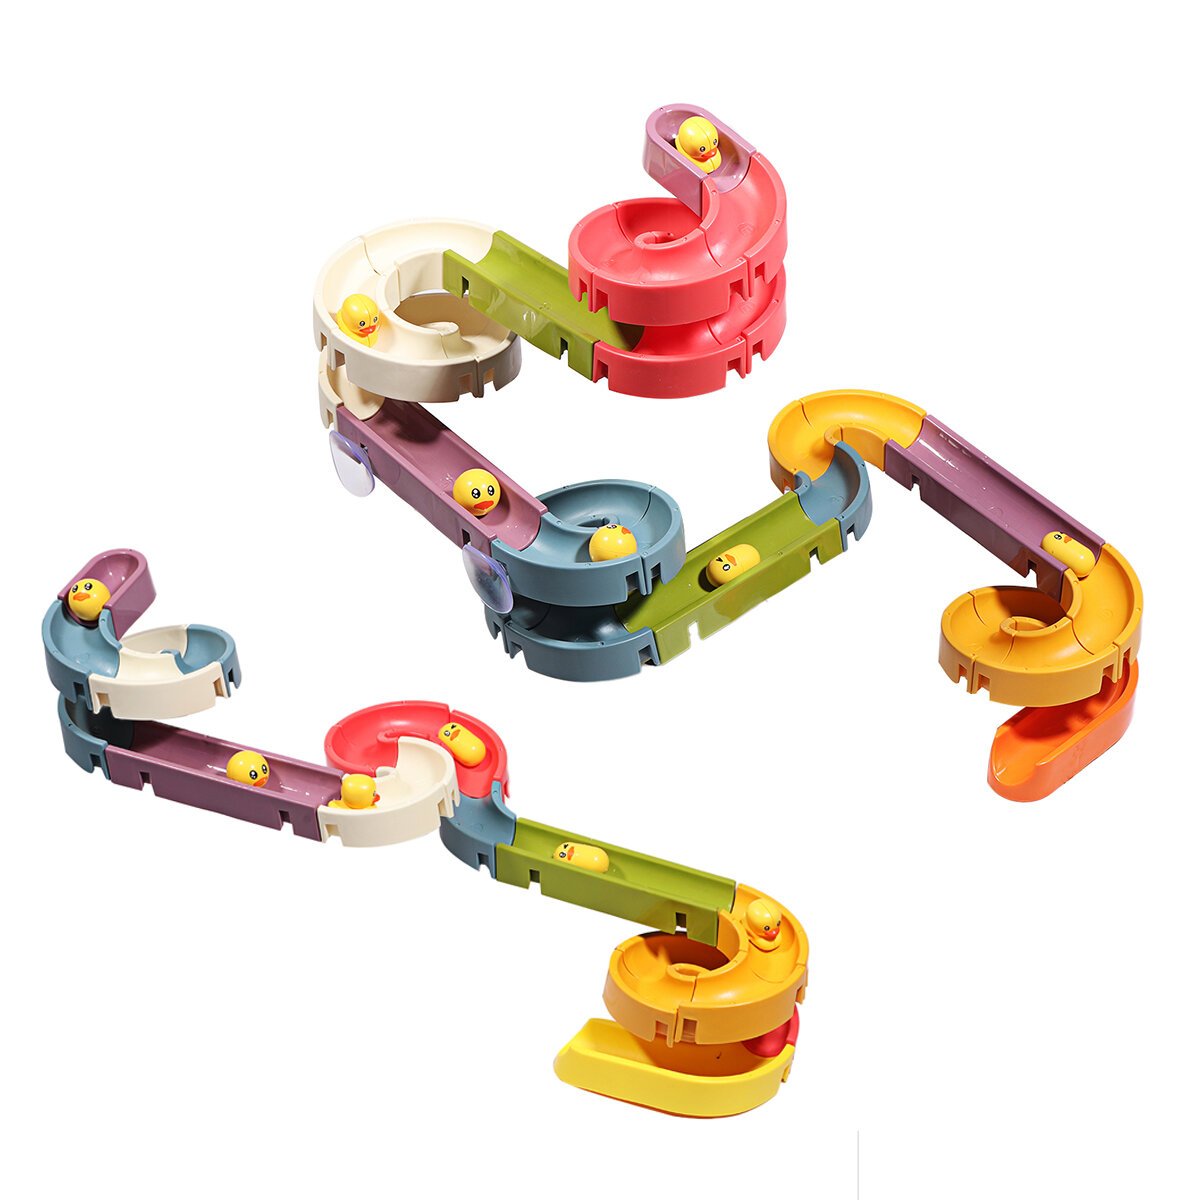 Rich Color Baby Bathroom Duck Play Water Track Slideway Game DIY Assembly Puzzle Early Education Set Toy for Kids Gift